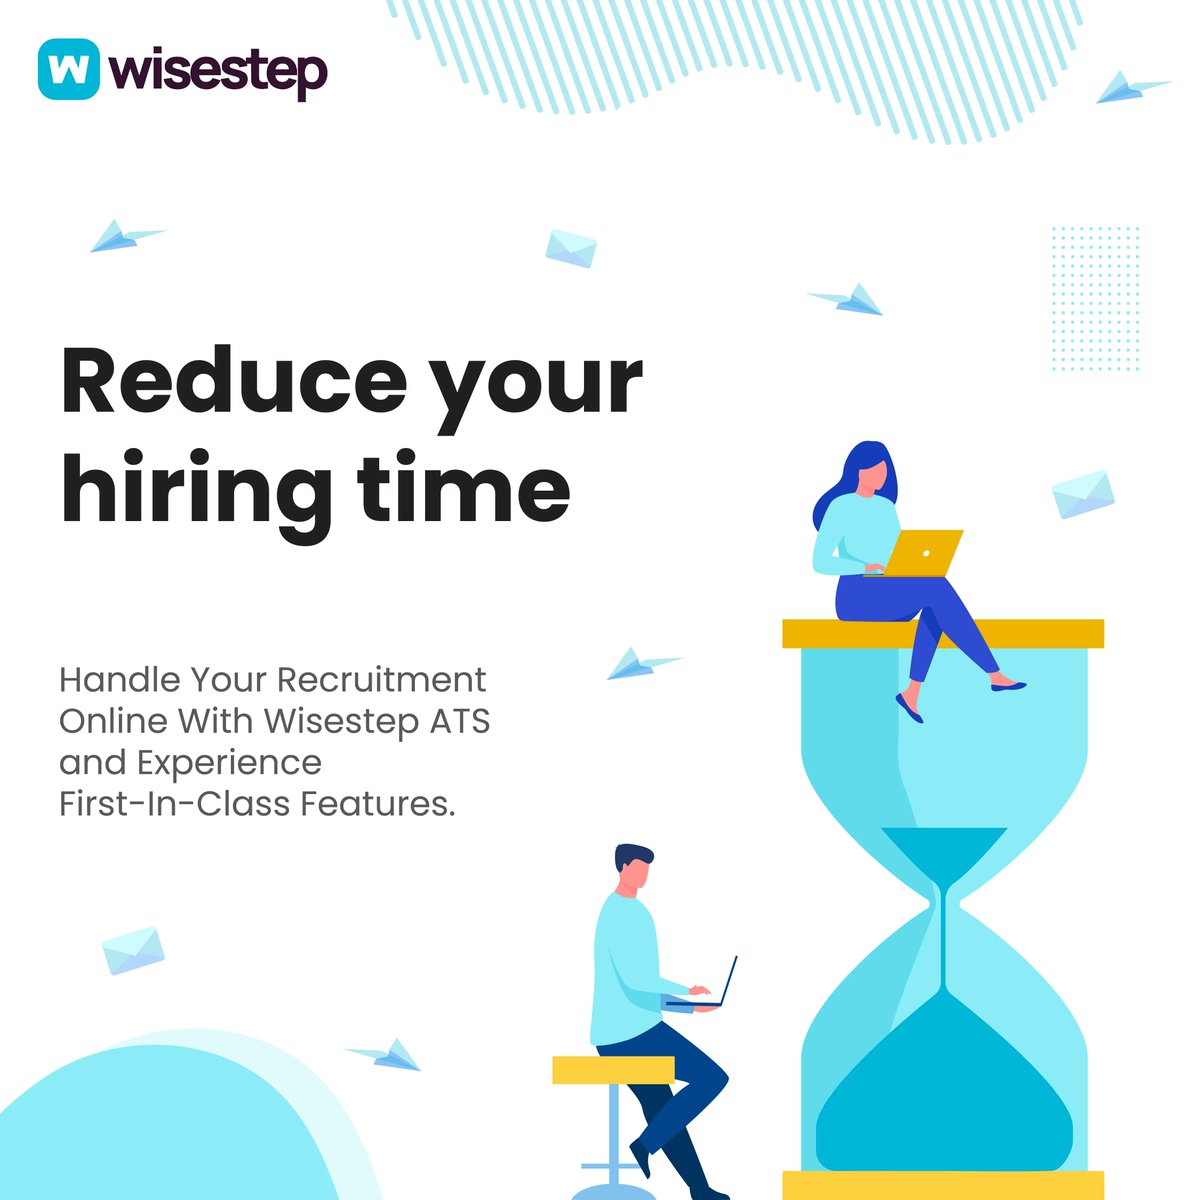 Save valuable time by automating routine tasks in the hiring process. Wisestep ATS lets you automate resume screening and candidate communications.

Book a demo now to know more about Wisestep ATS

buff.ly/3SywYr8

#ATS #WisestepATS #applicanttrackingsystem